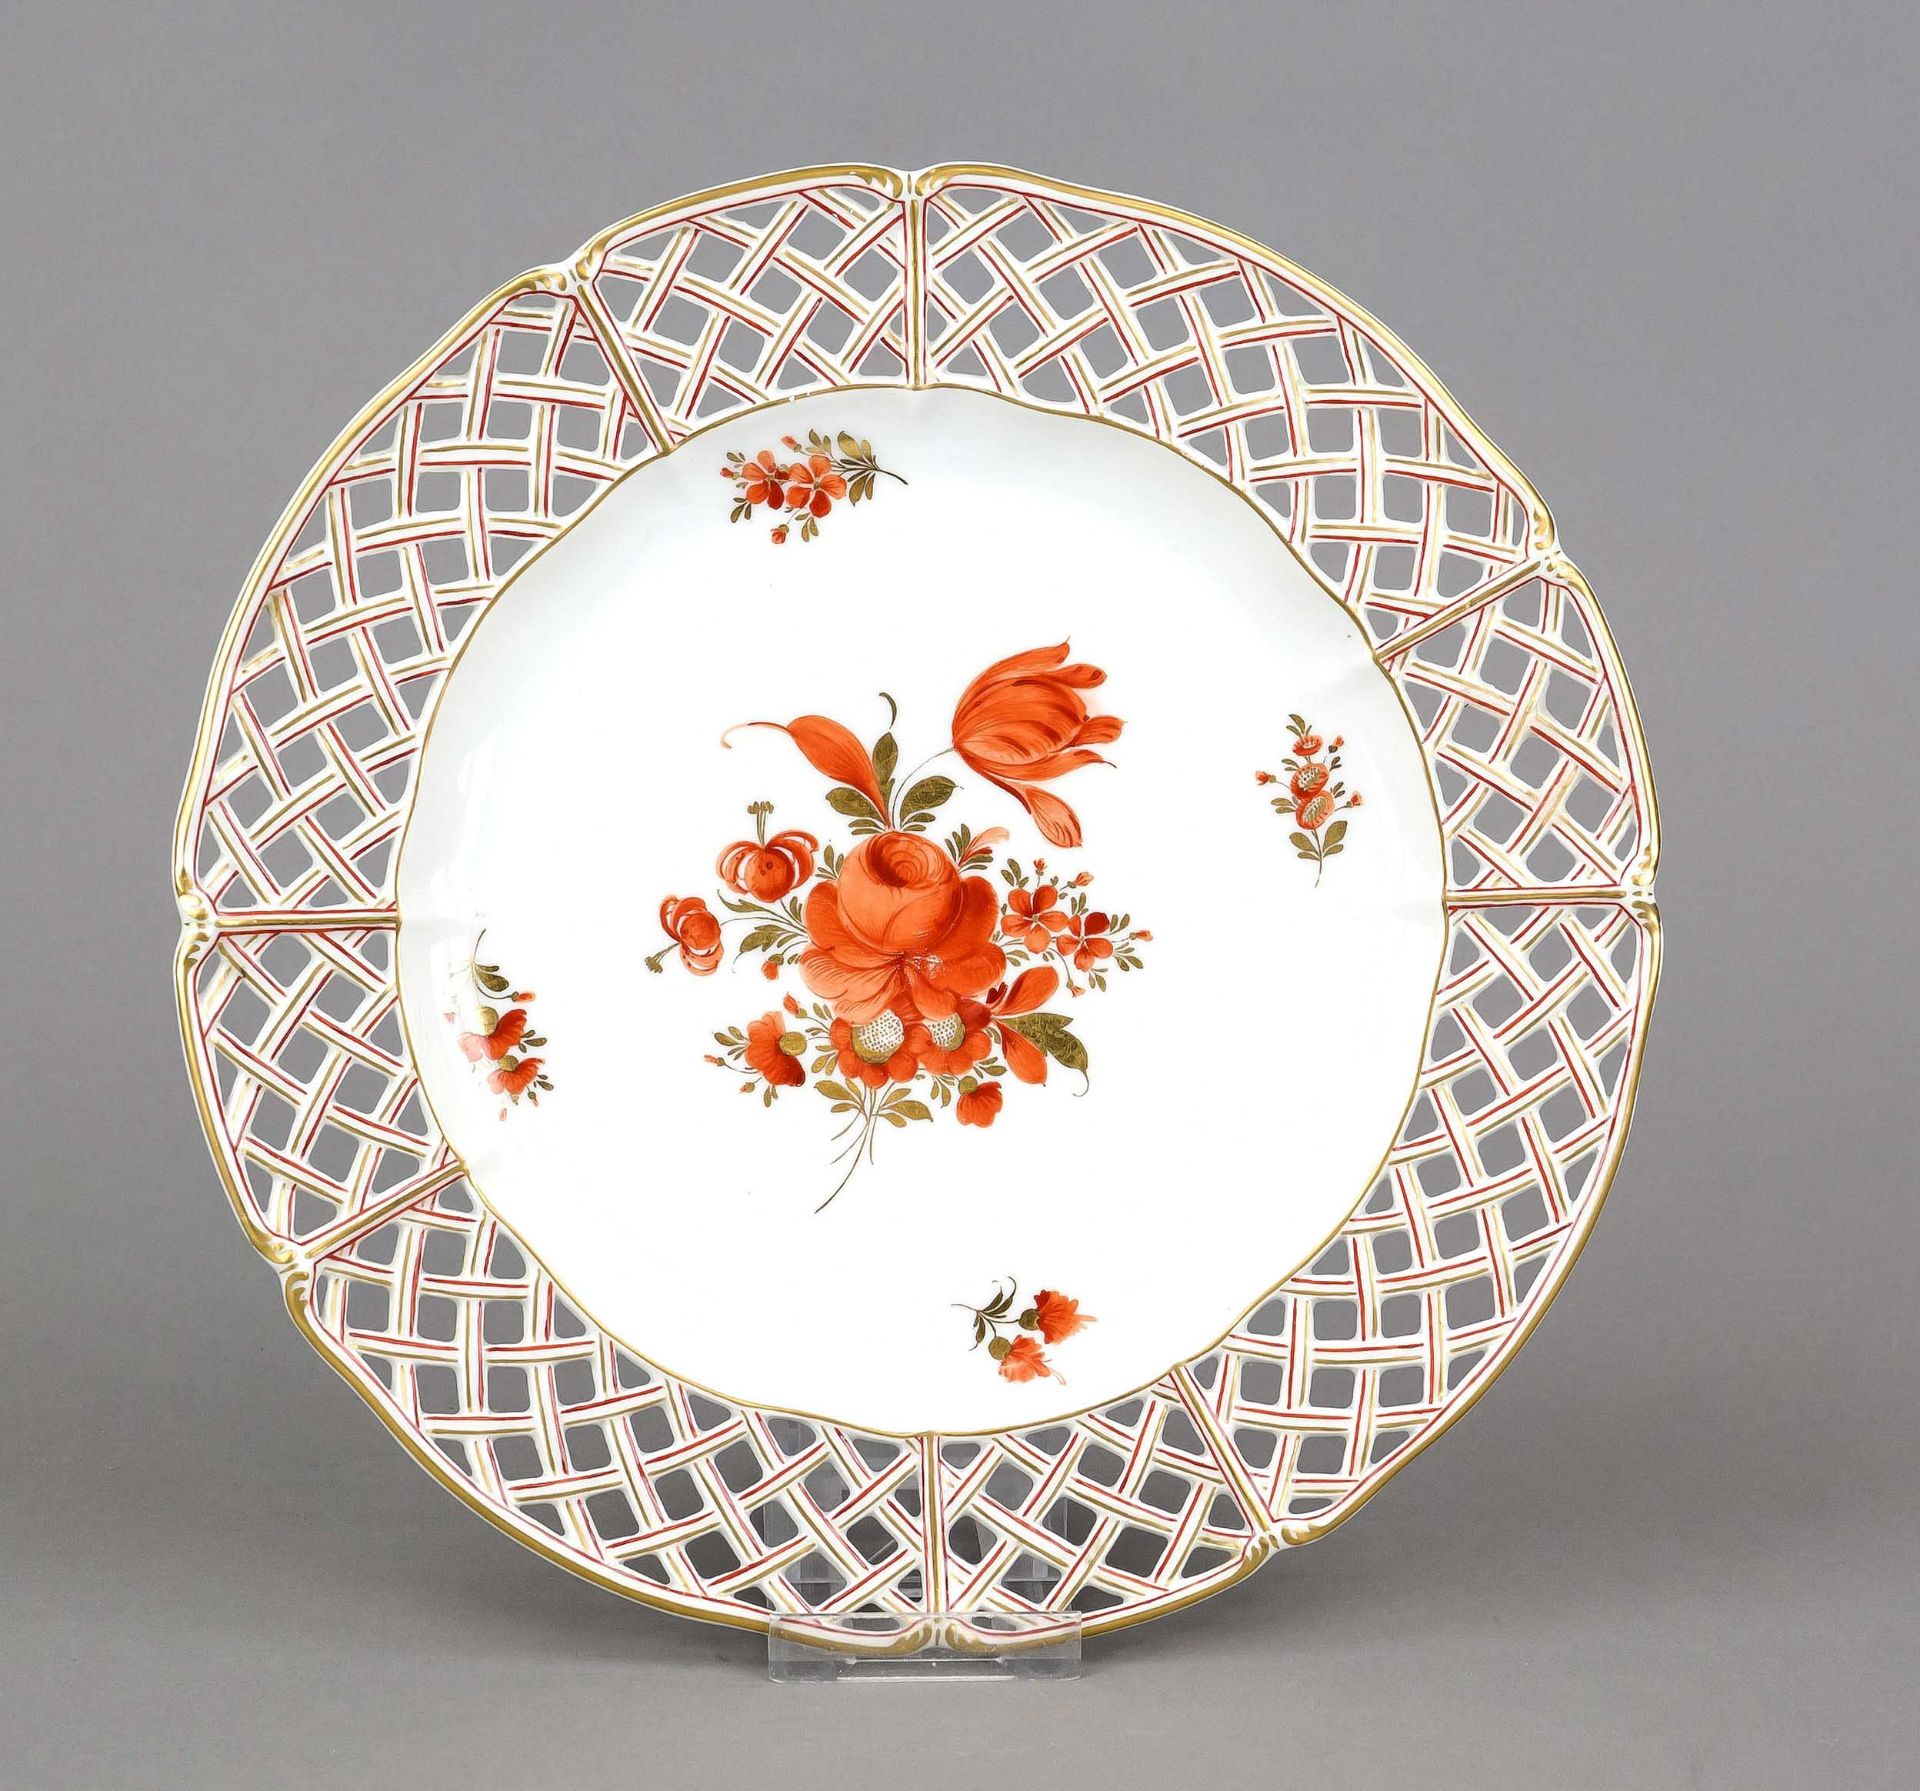 Openwork plate, Nymphenburg, 20th century, floral painting in red and gold in the mirror, basket-